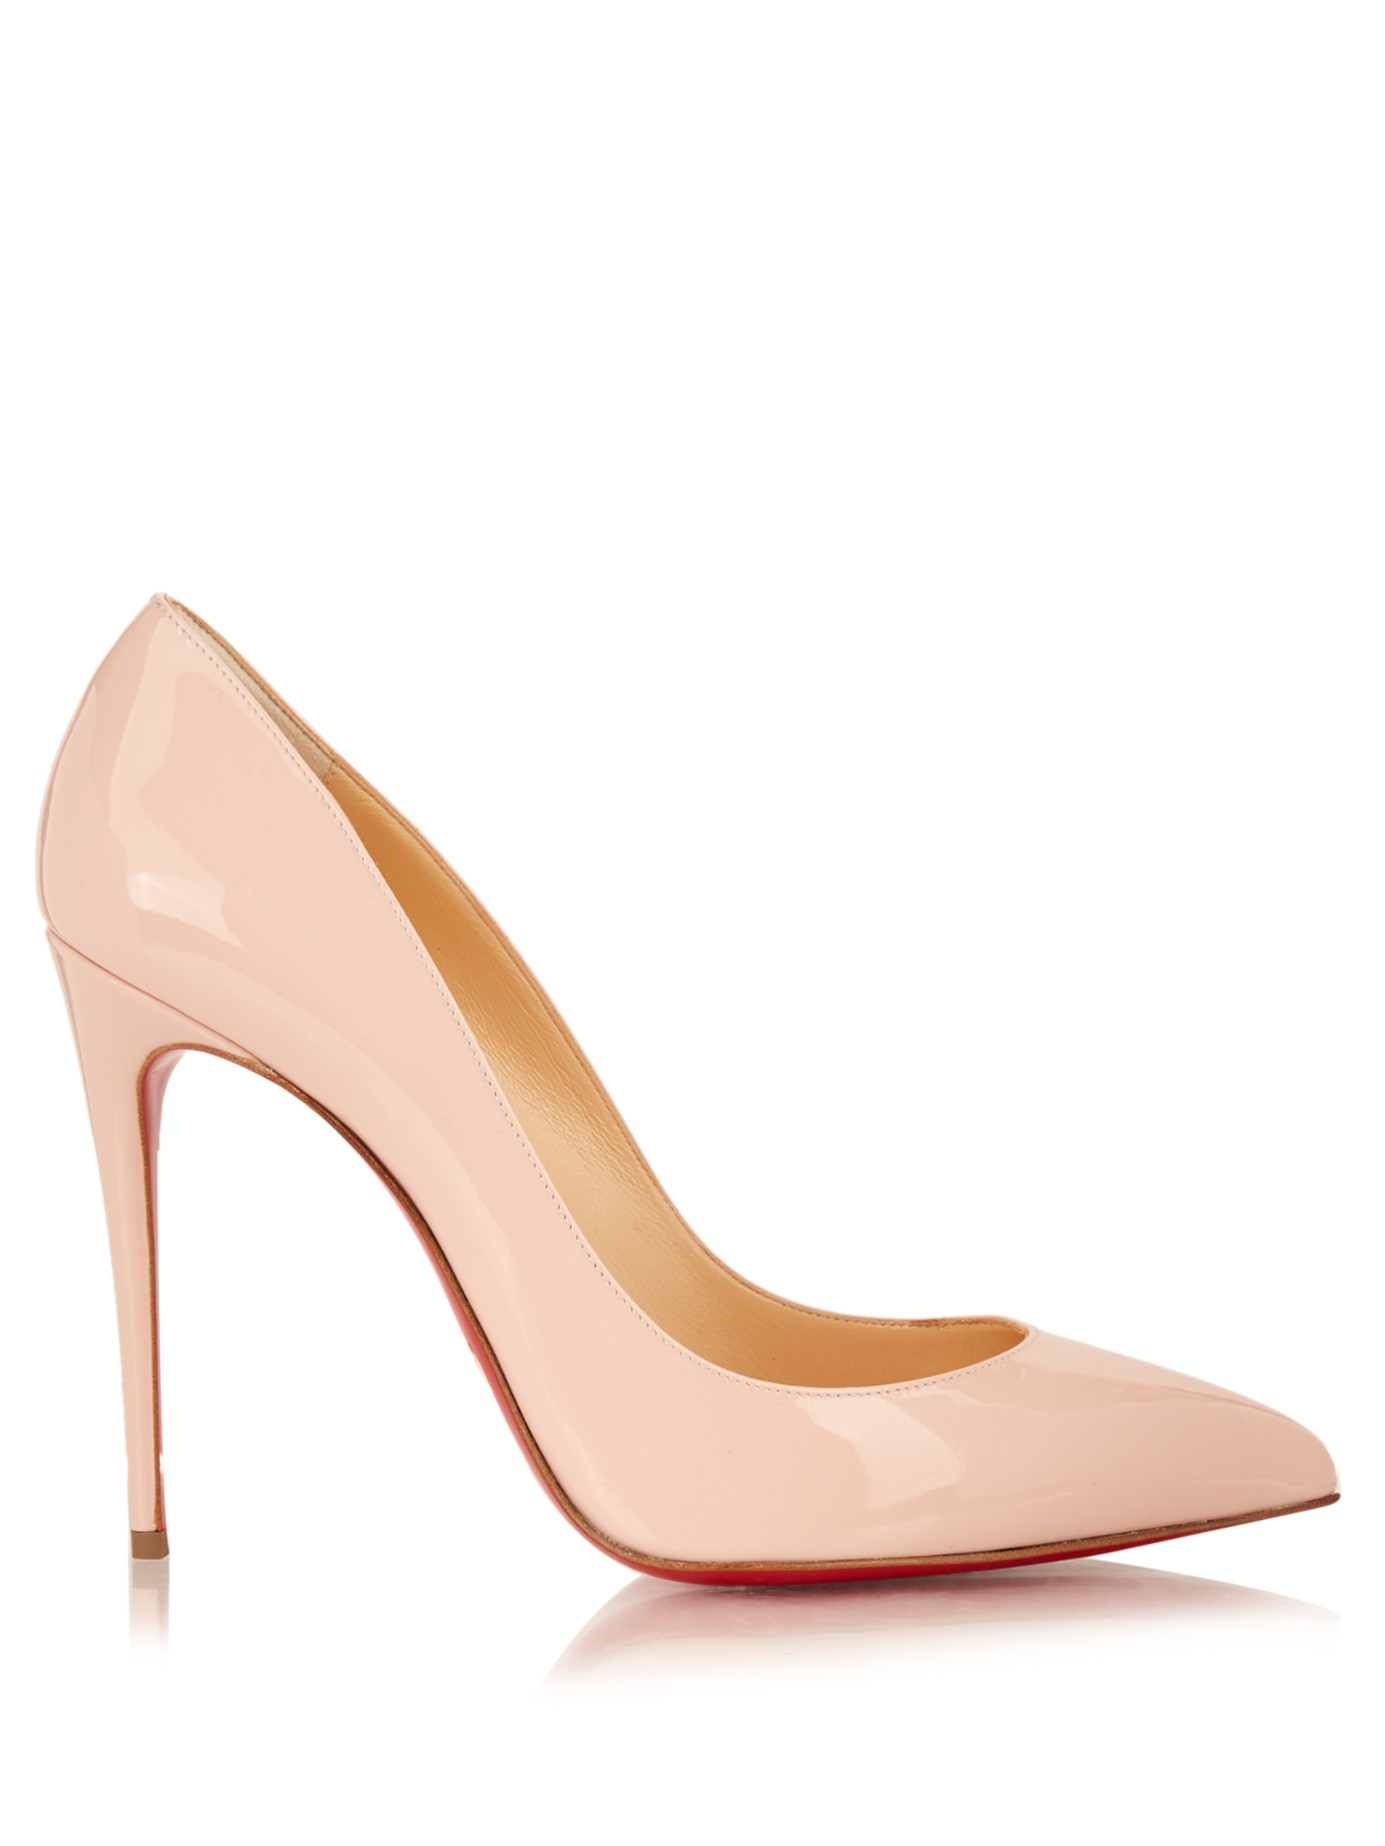 christian louboutin pigalle follies 100 patent